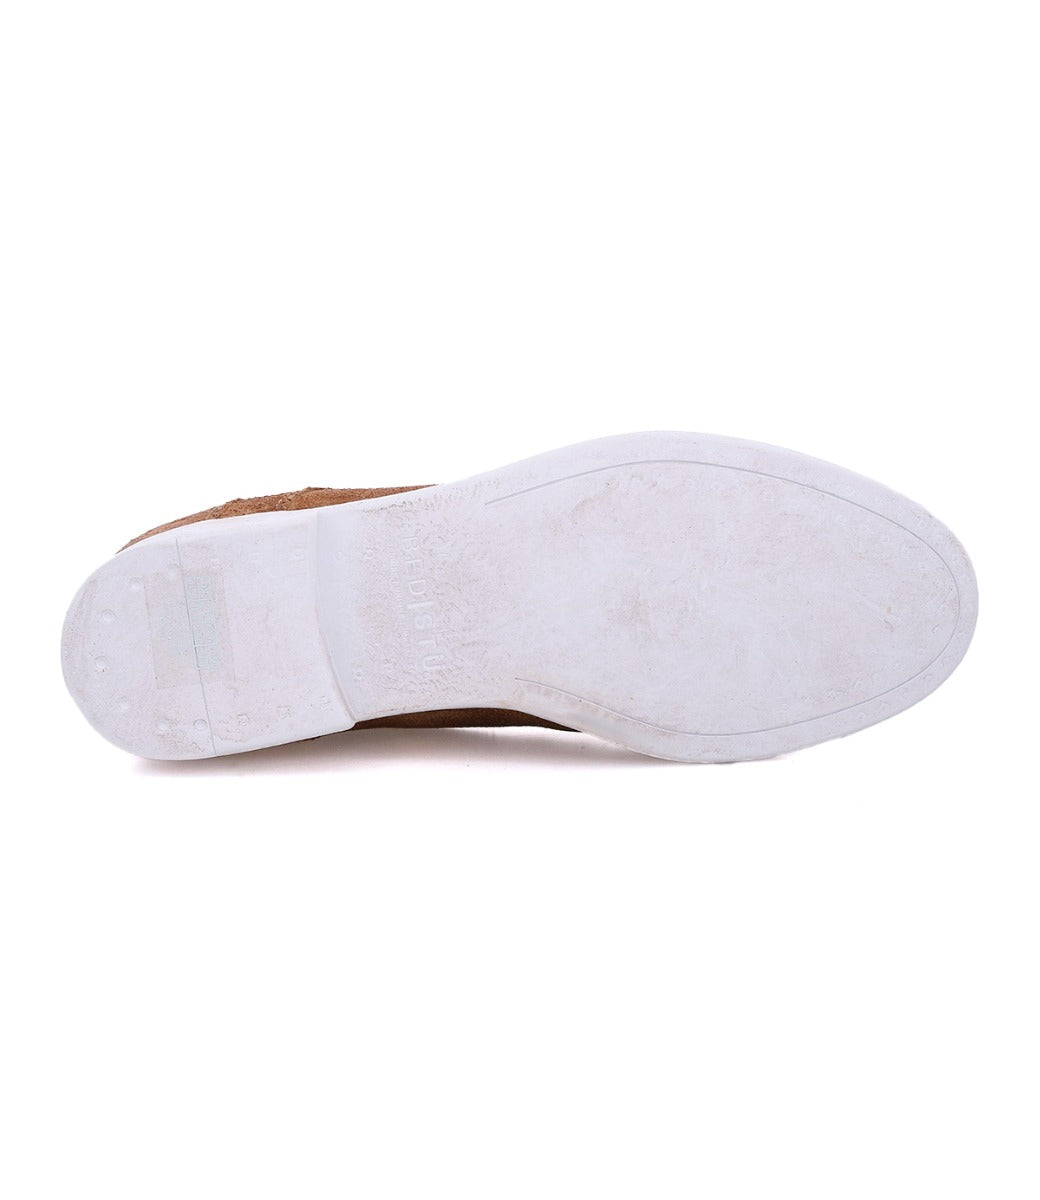 A pair of Leonardo shoes with white soles on a white background by Bed Stu.